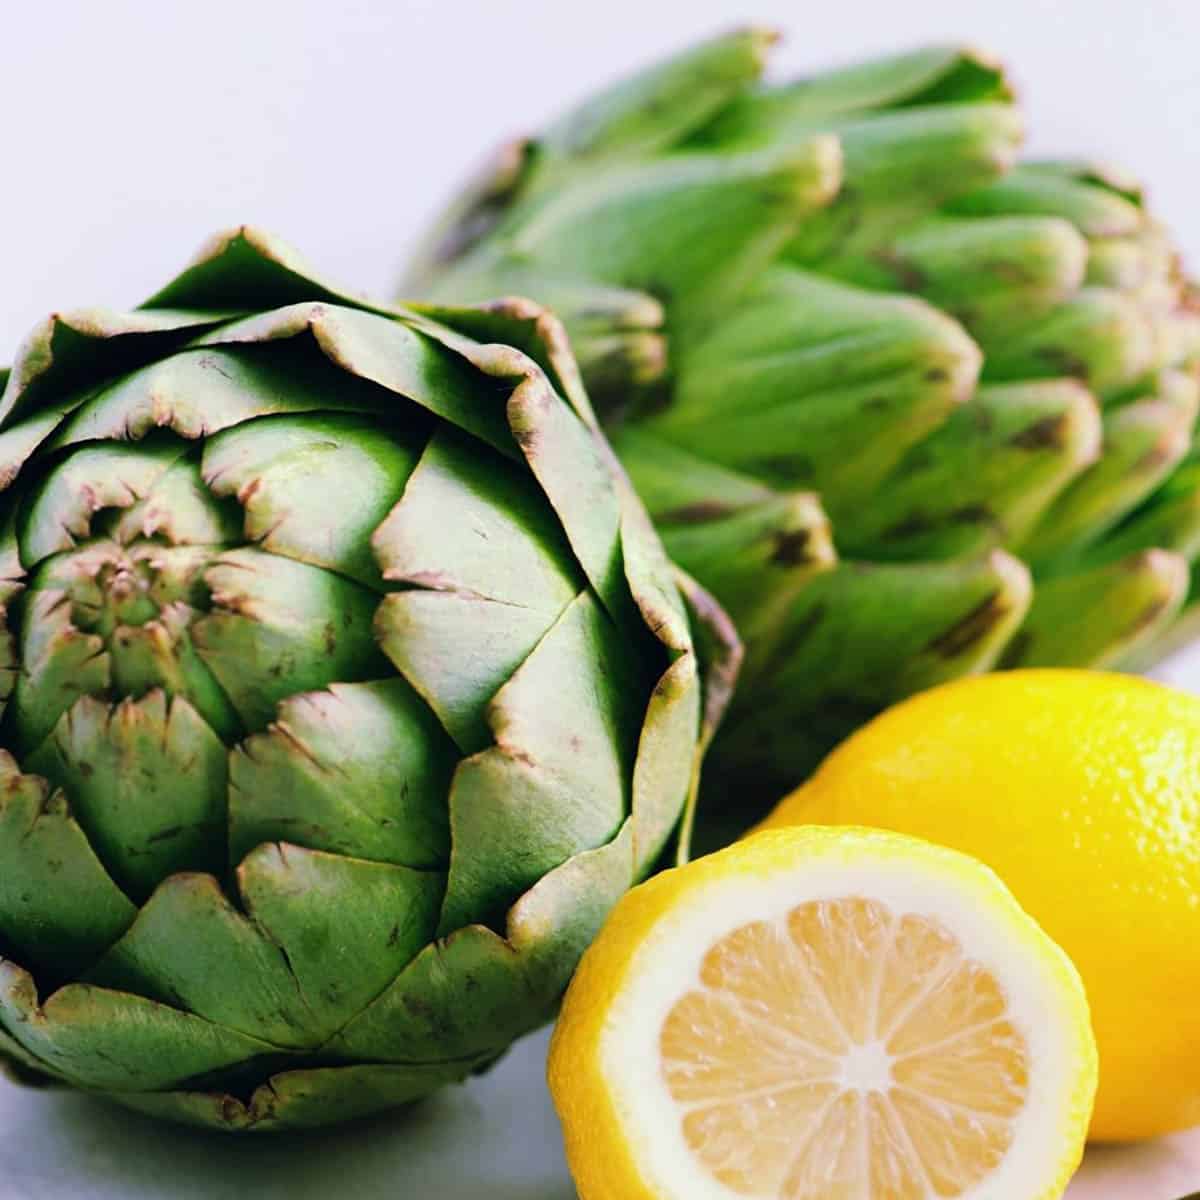 Fresh artichokes on a white counter, with sliced lemons on the side.